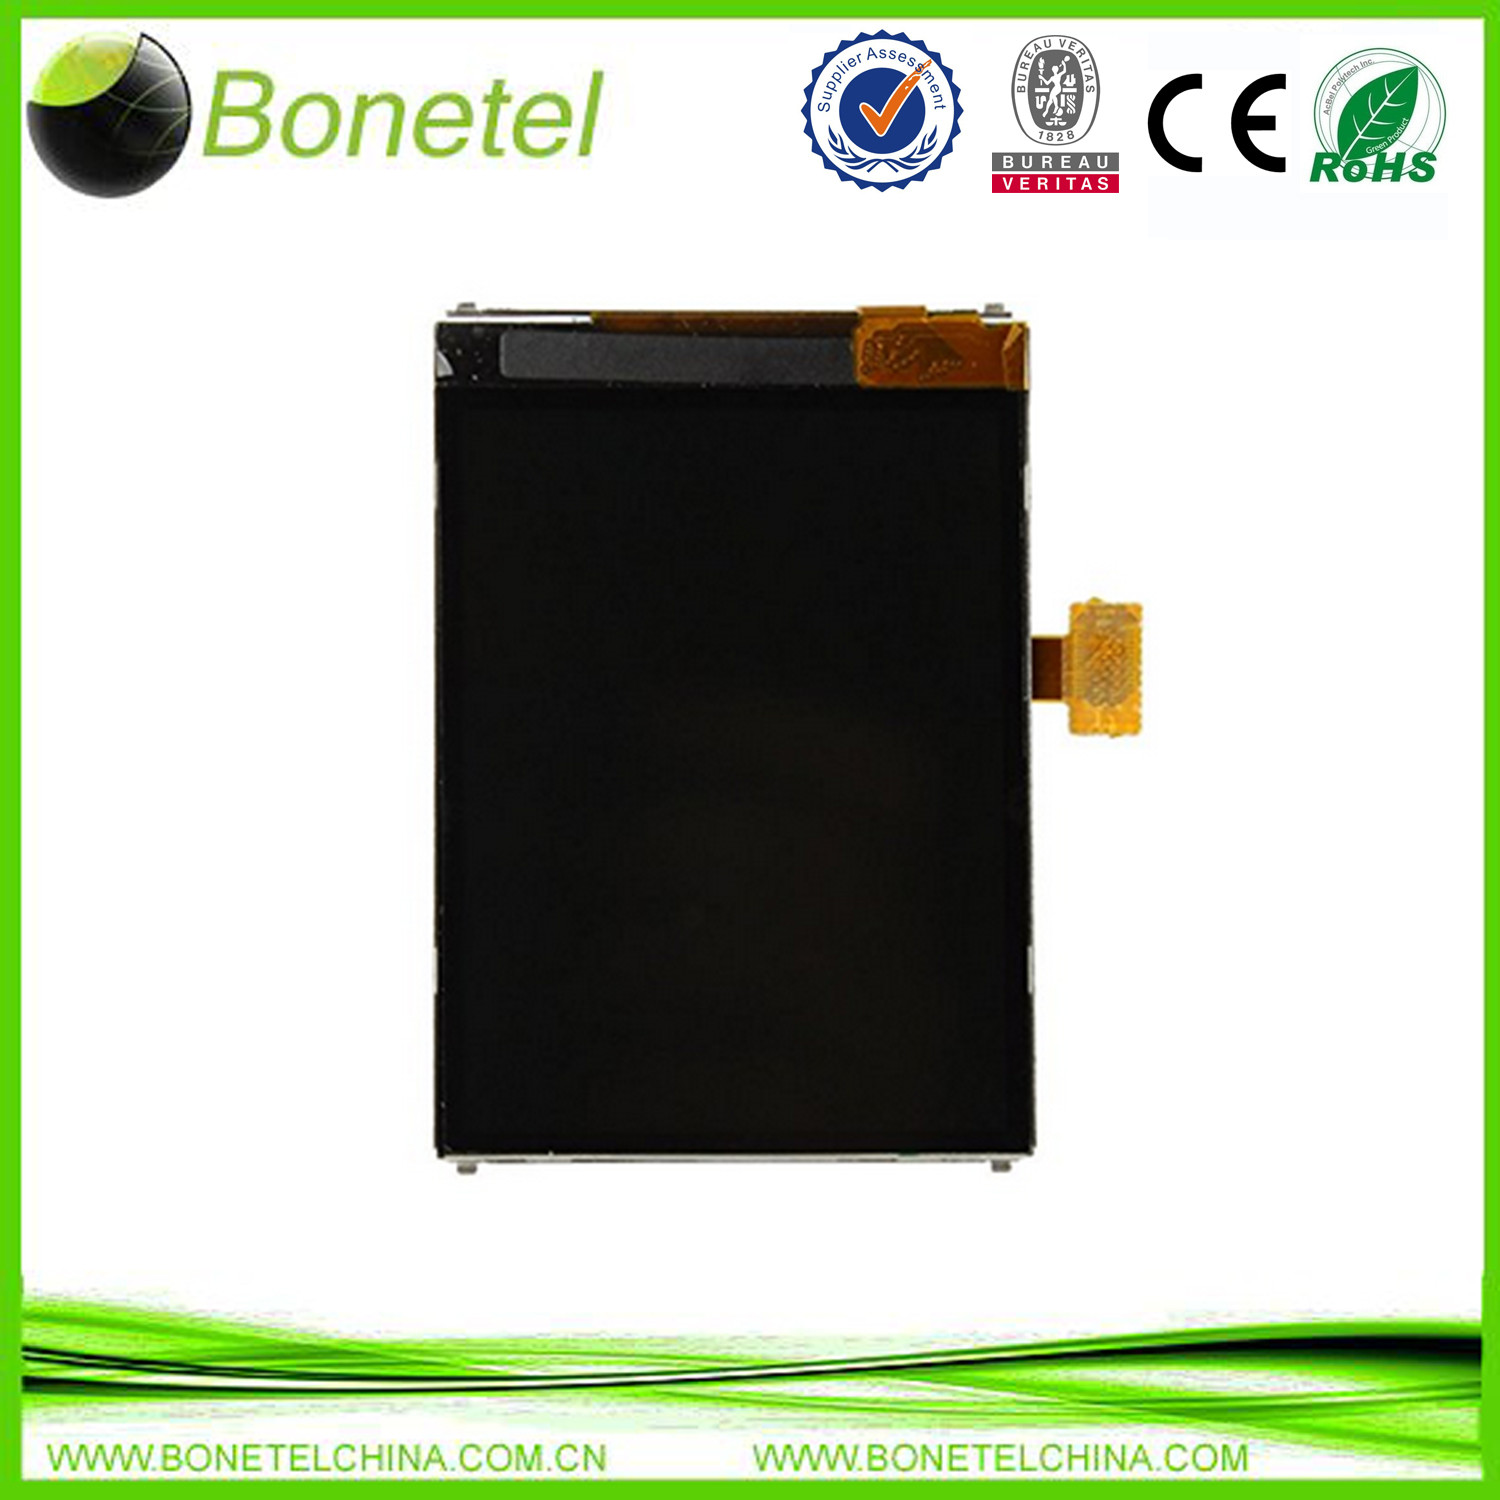 LCD & Touch Screens - Replacement LCD Display Screen for Samsung S3370